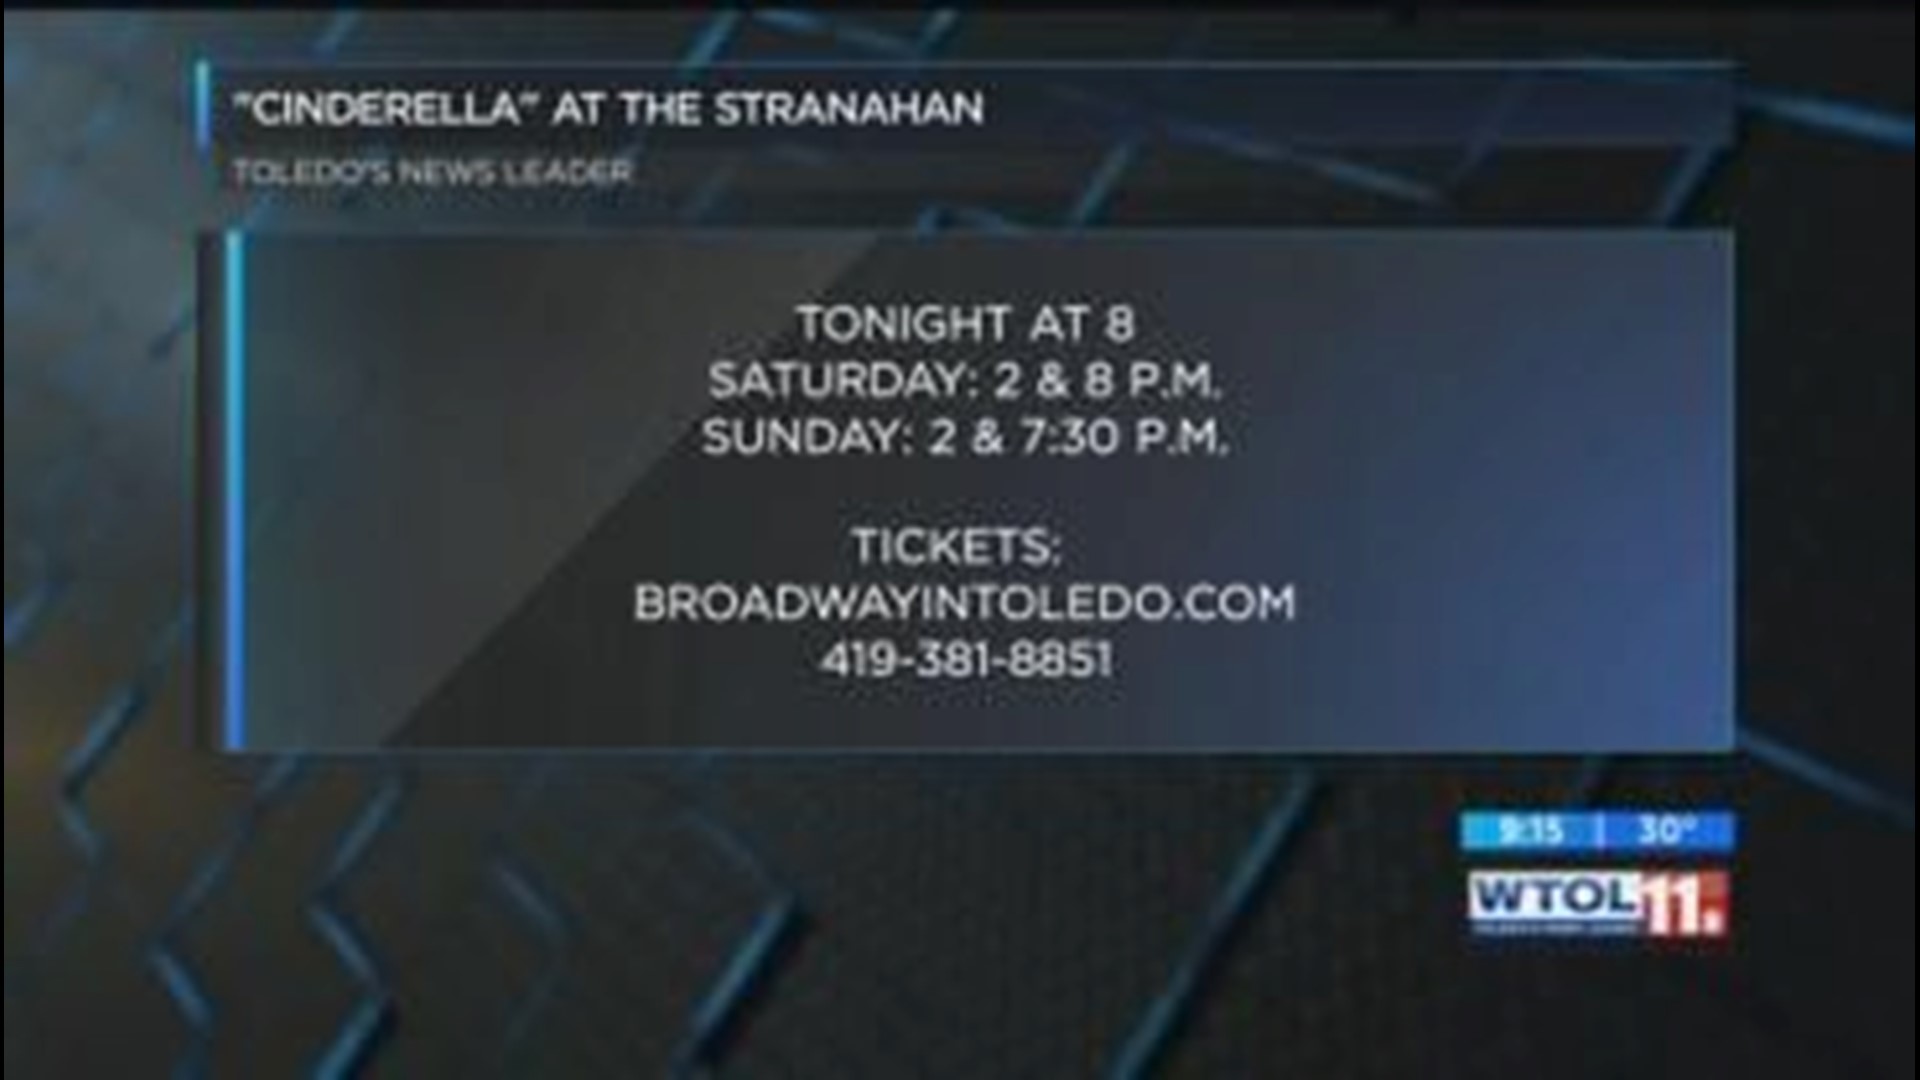 Enjoy 'Cinderella' this weekend at the Stranahan Theater